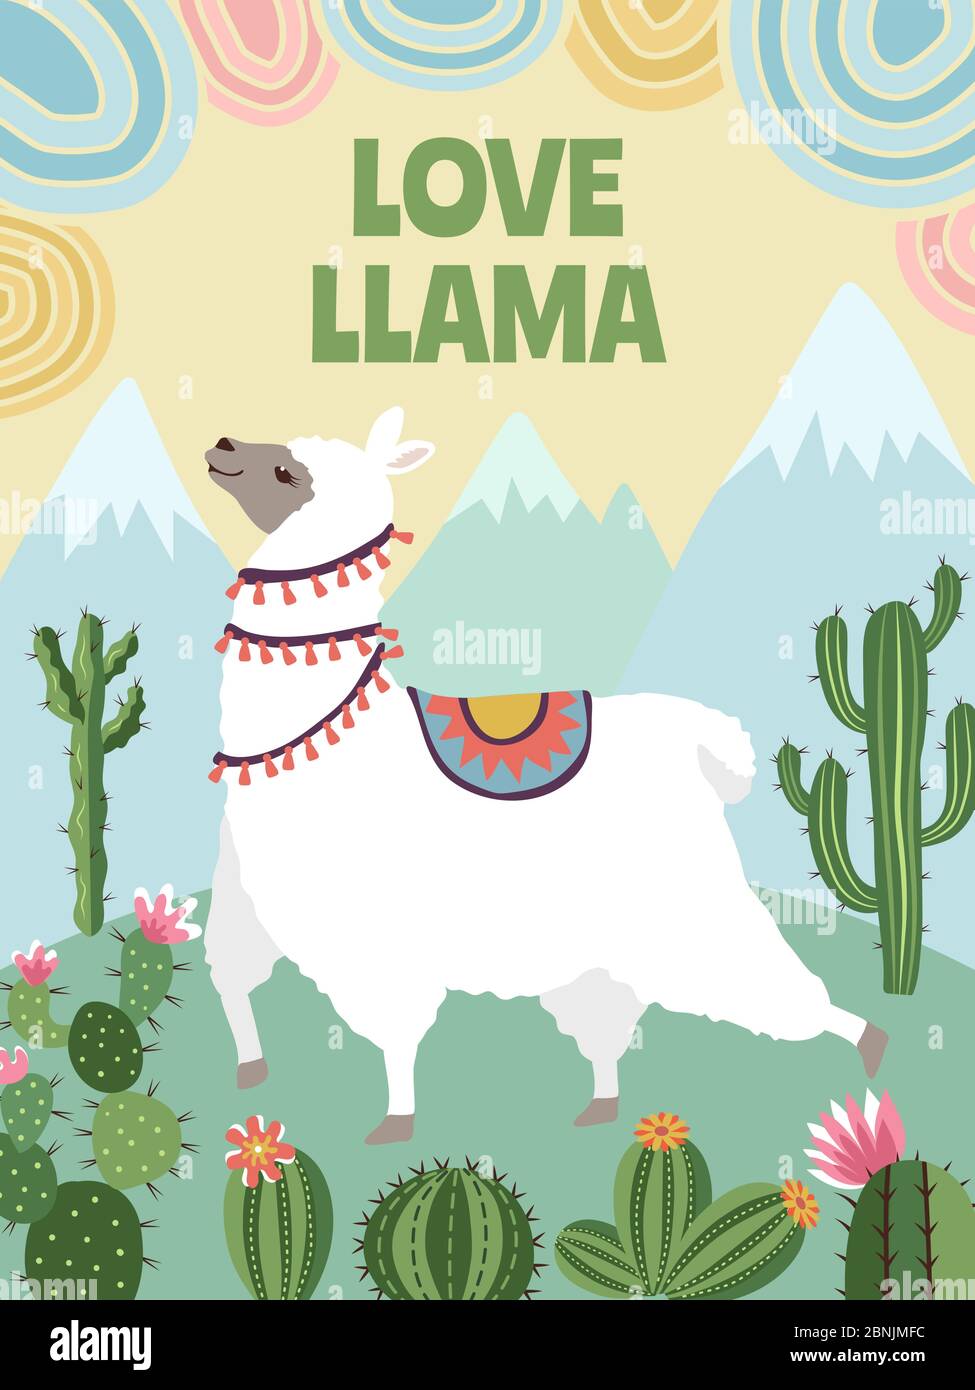 Background vector picture of llama, mountains and cactus. Cartoon illustrations for poster design template Stock Vector